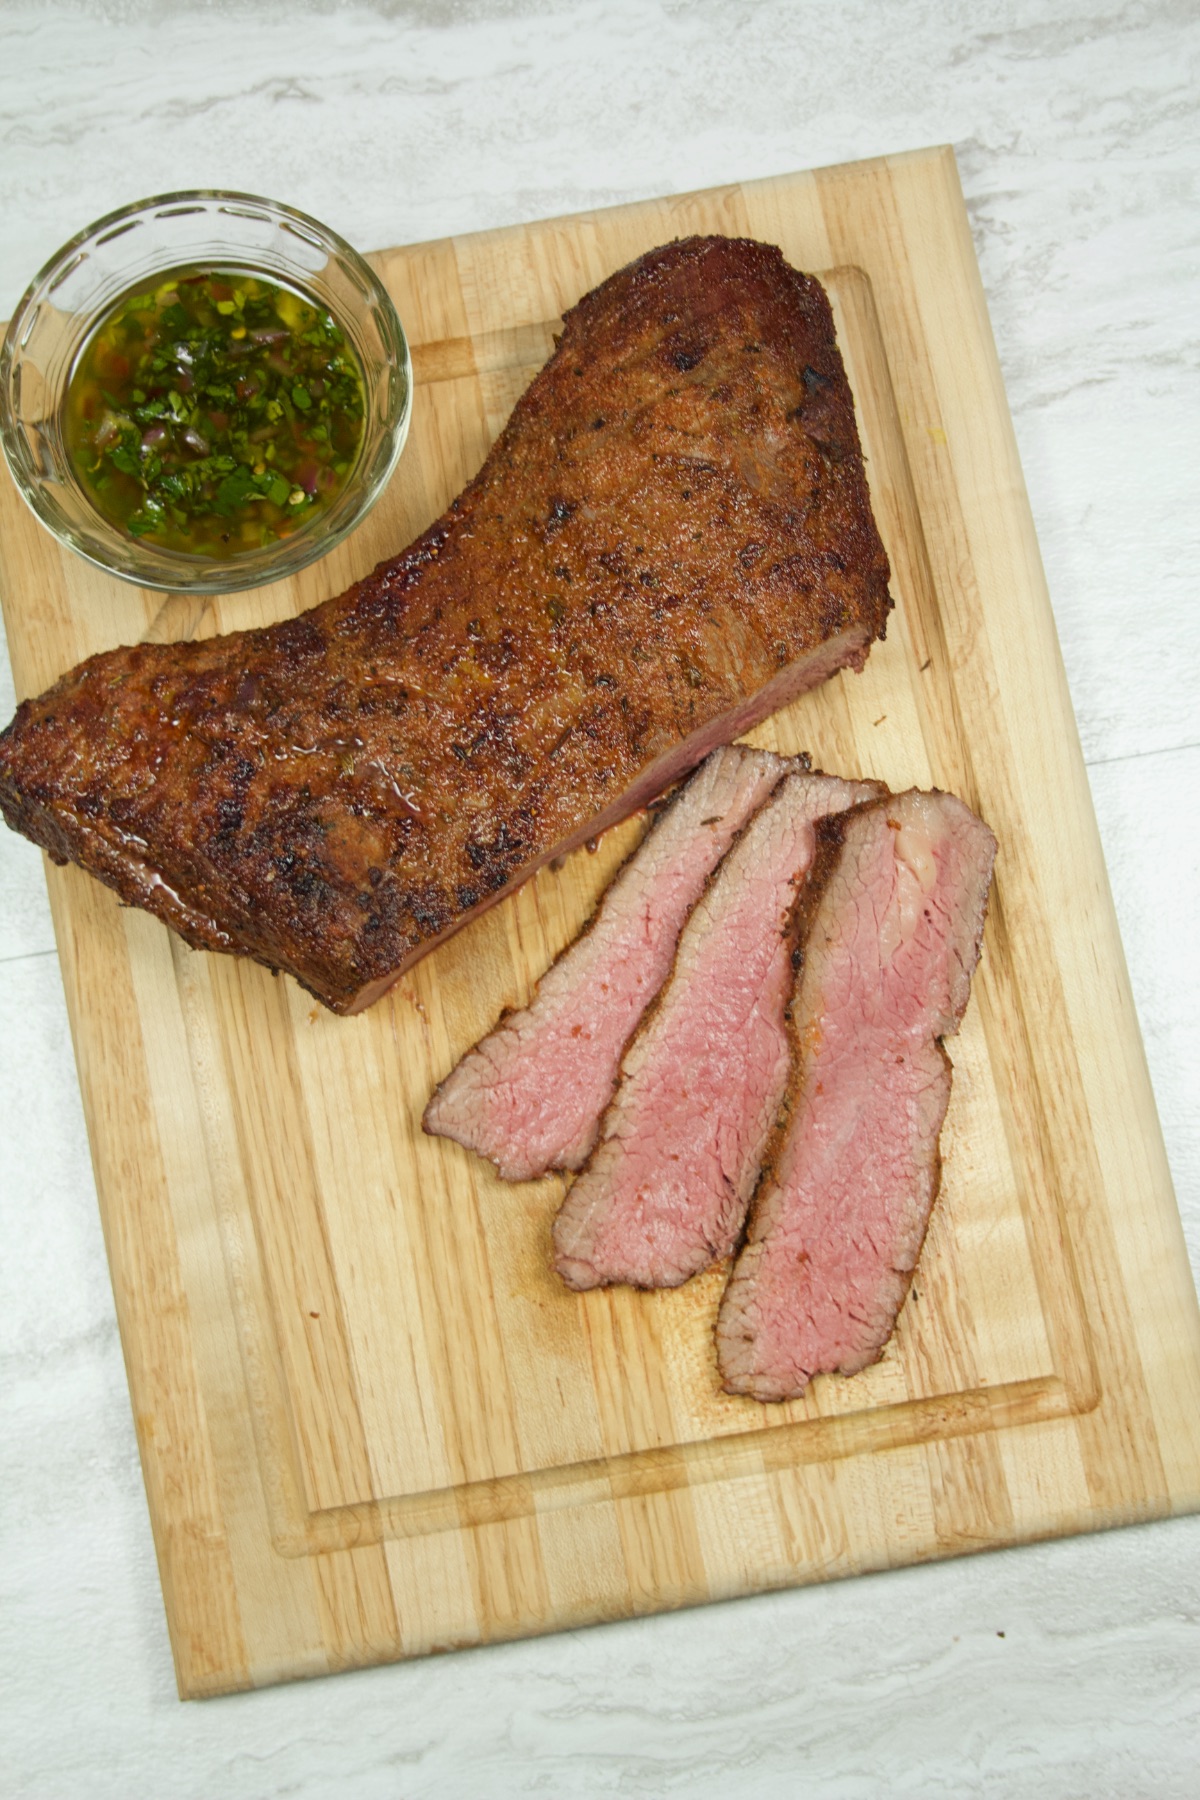 Overhead view of a tri-tip roast cut into thin steaks, with a ramekin of chimichurri sauce sitting nearby.